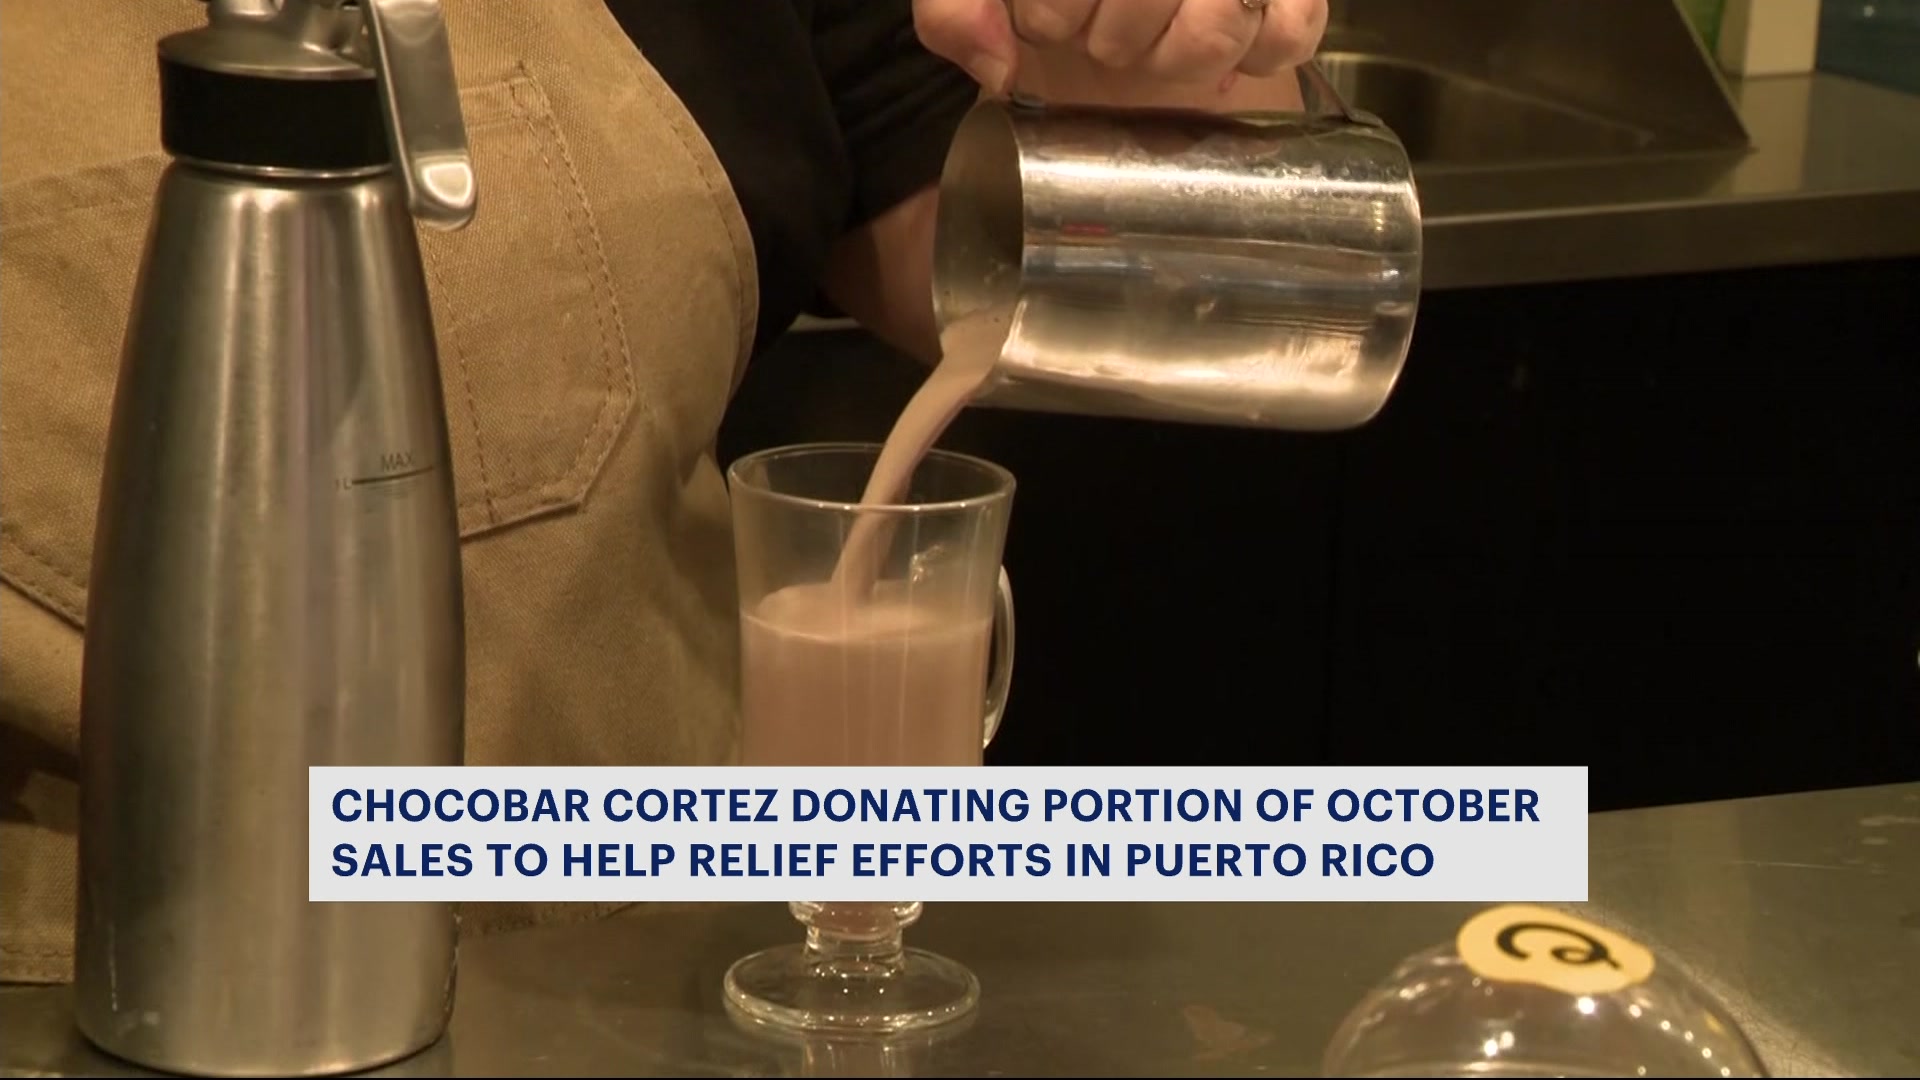 Chocobar Cortes donates portion of sales to help children in Puerto Rico